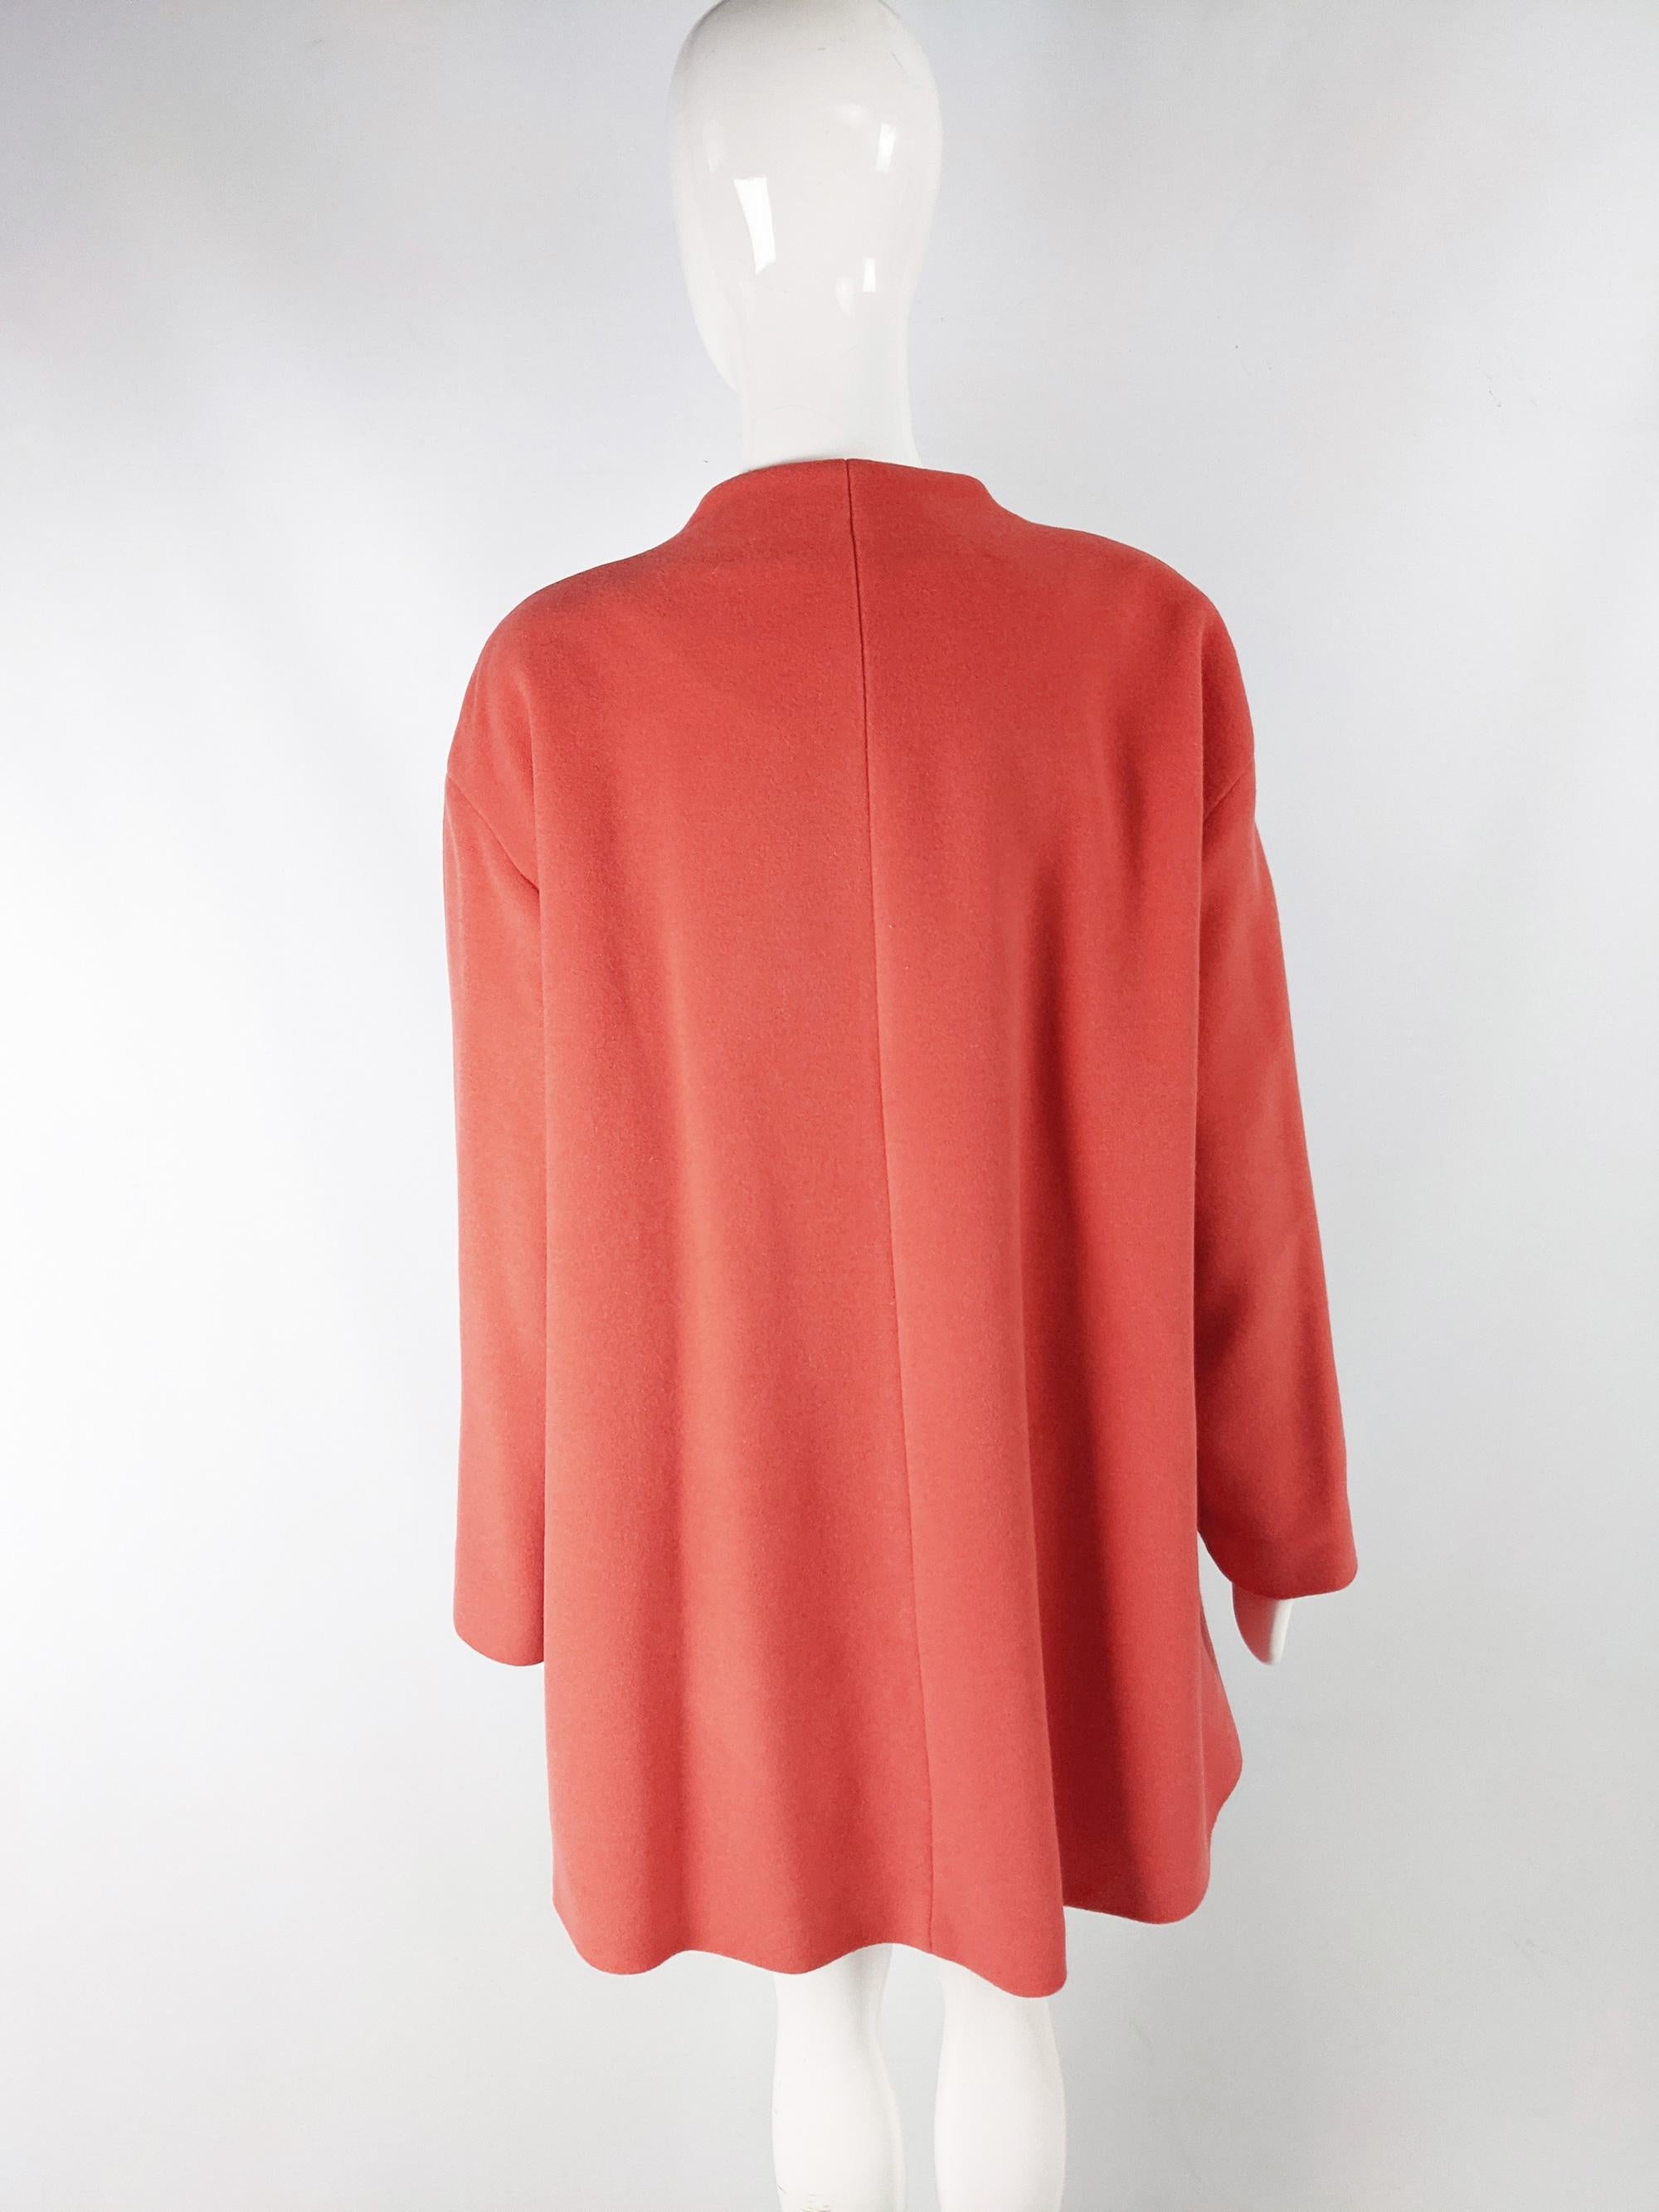 Escada Vintage Coral Cashmere Wool & Angora Swing Trapeze Coat, 1980s For Sale 1